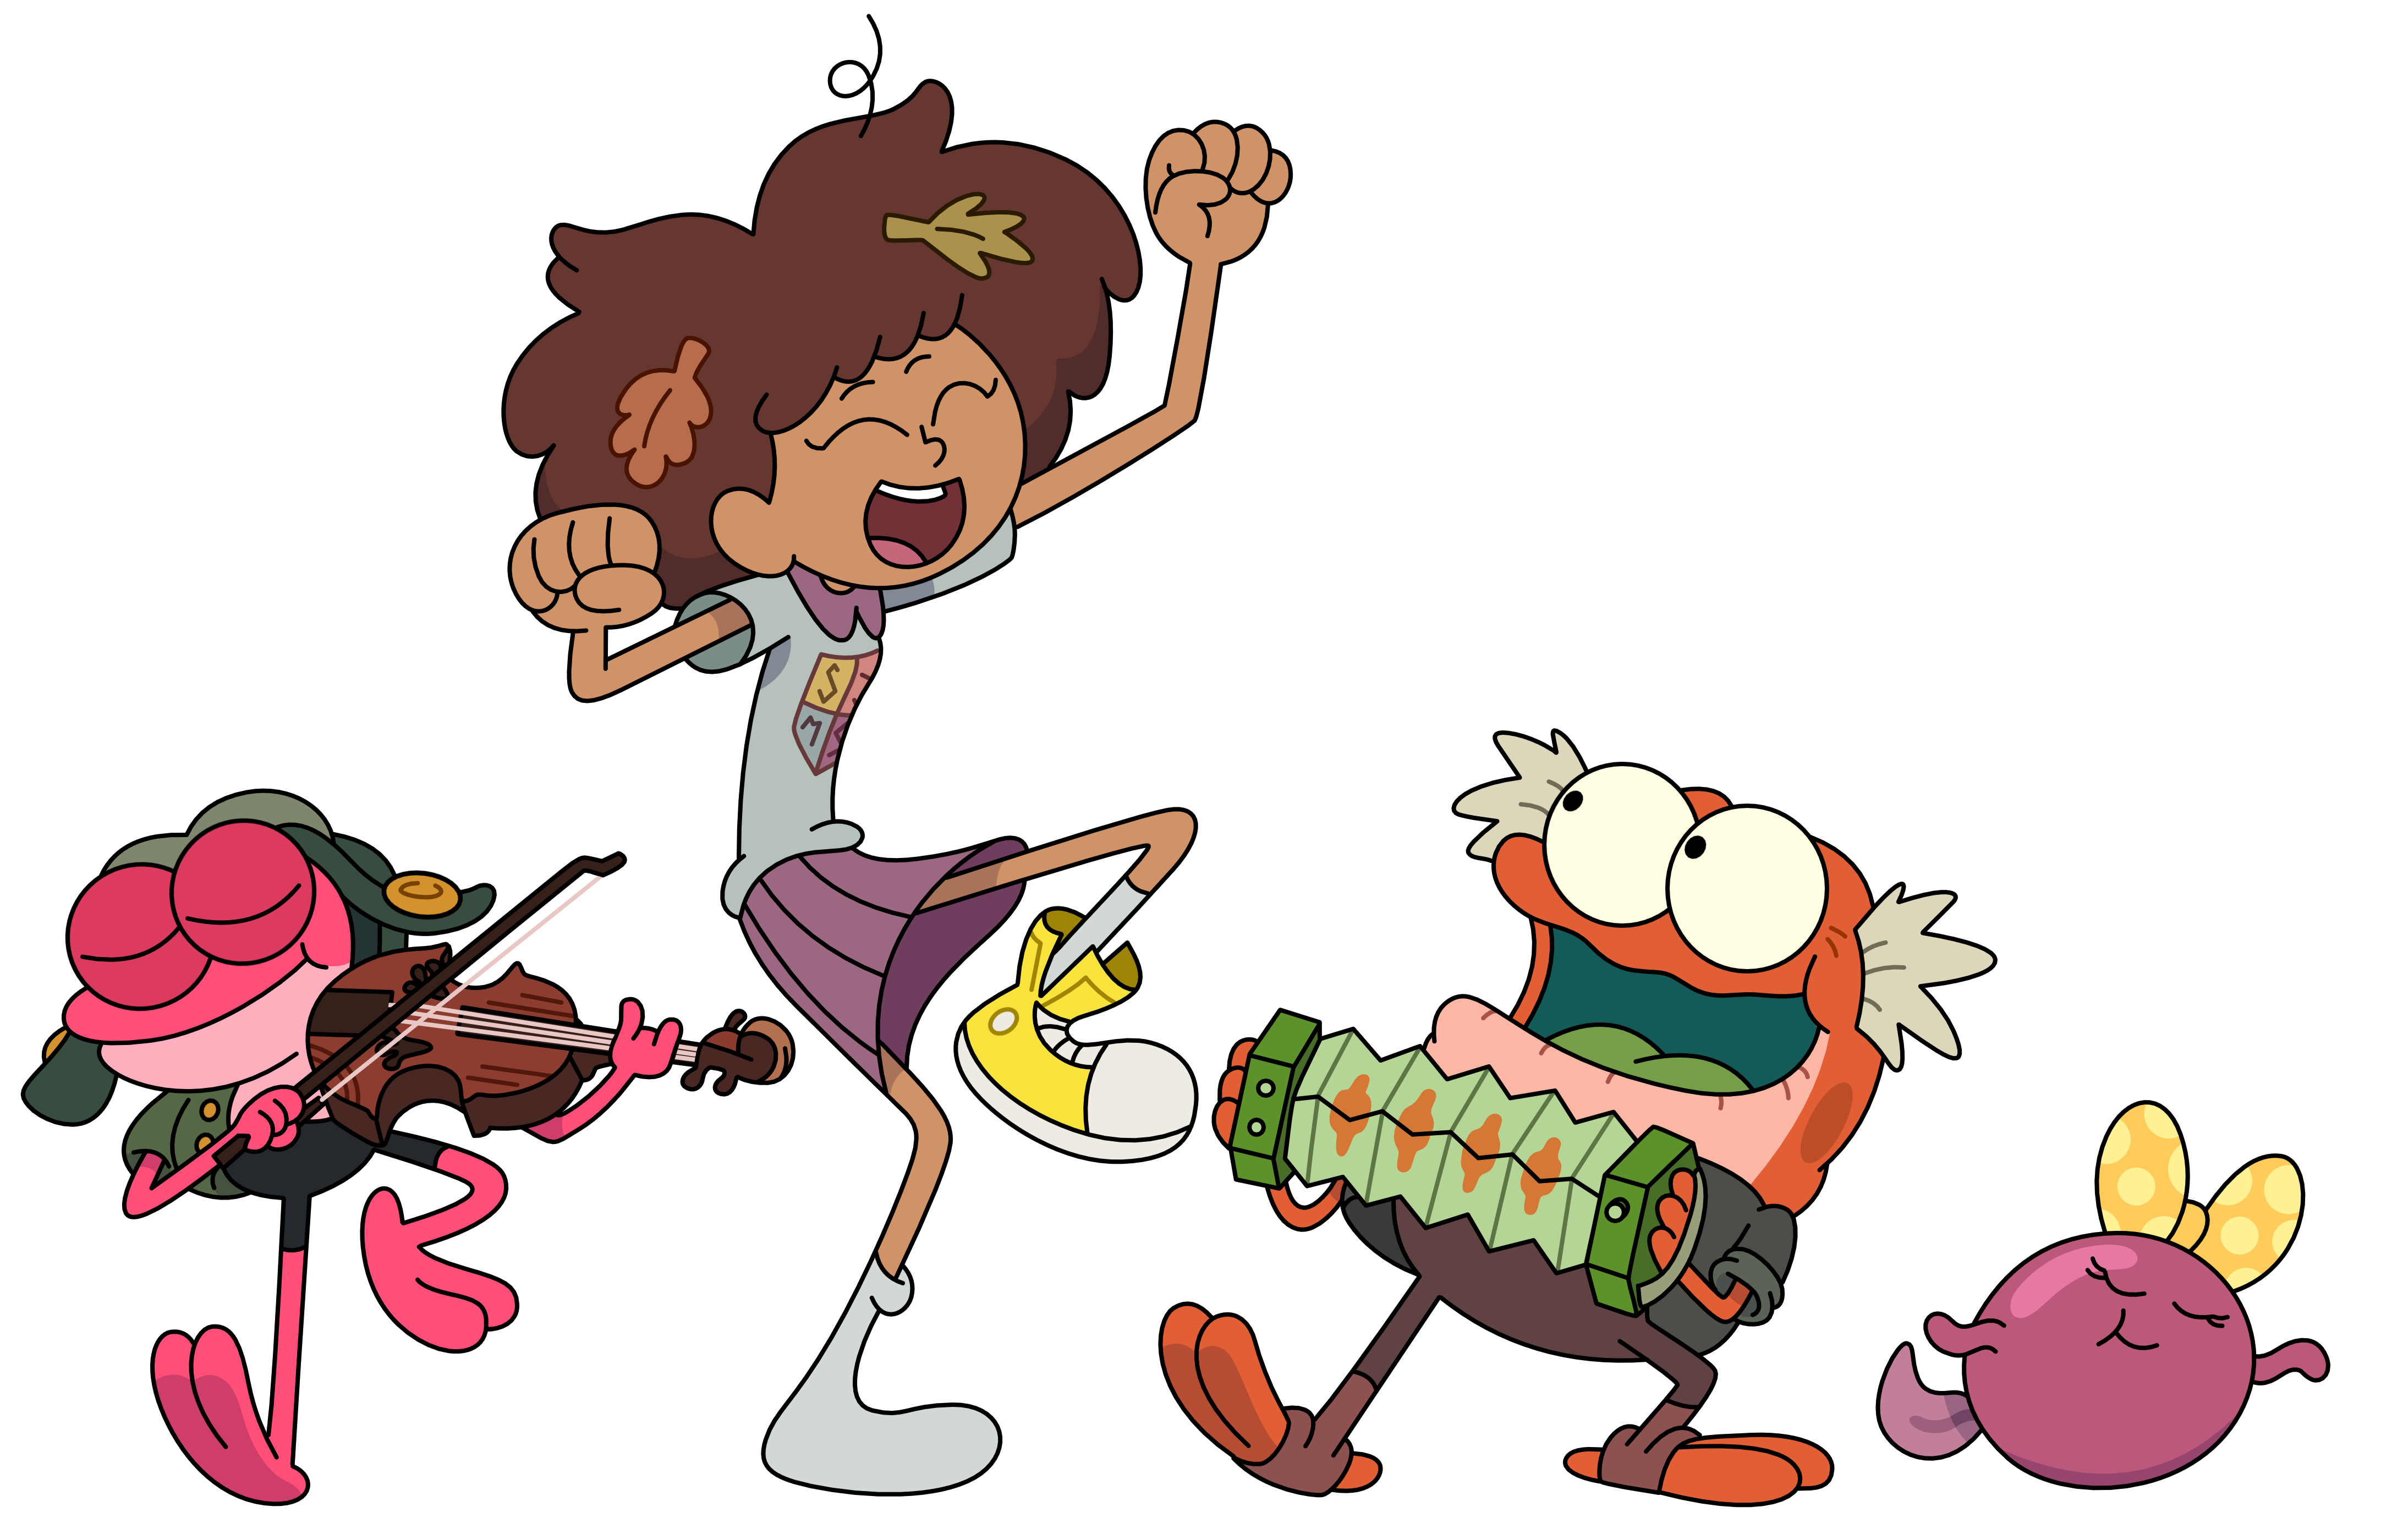 Amphibia and The Owl House crossover panel, Amphibia Wiki